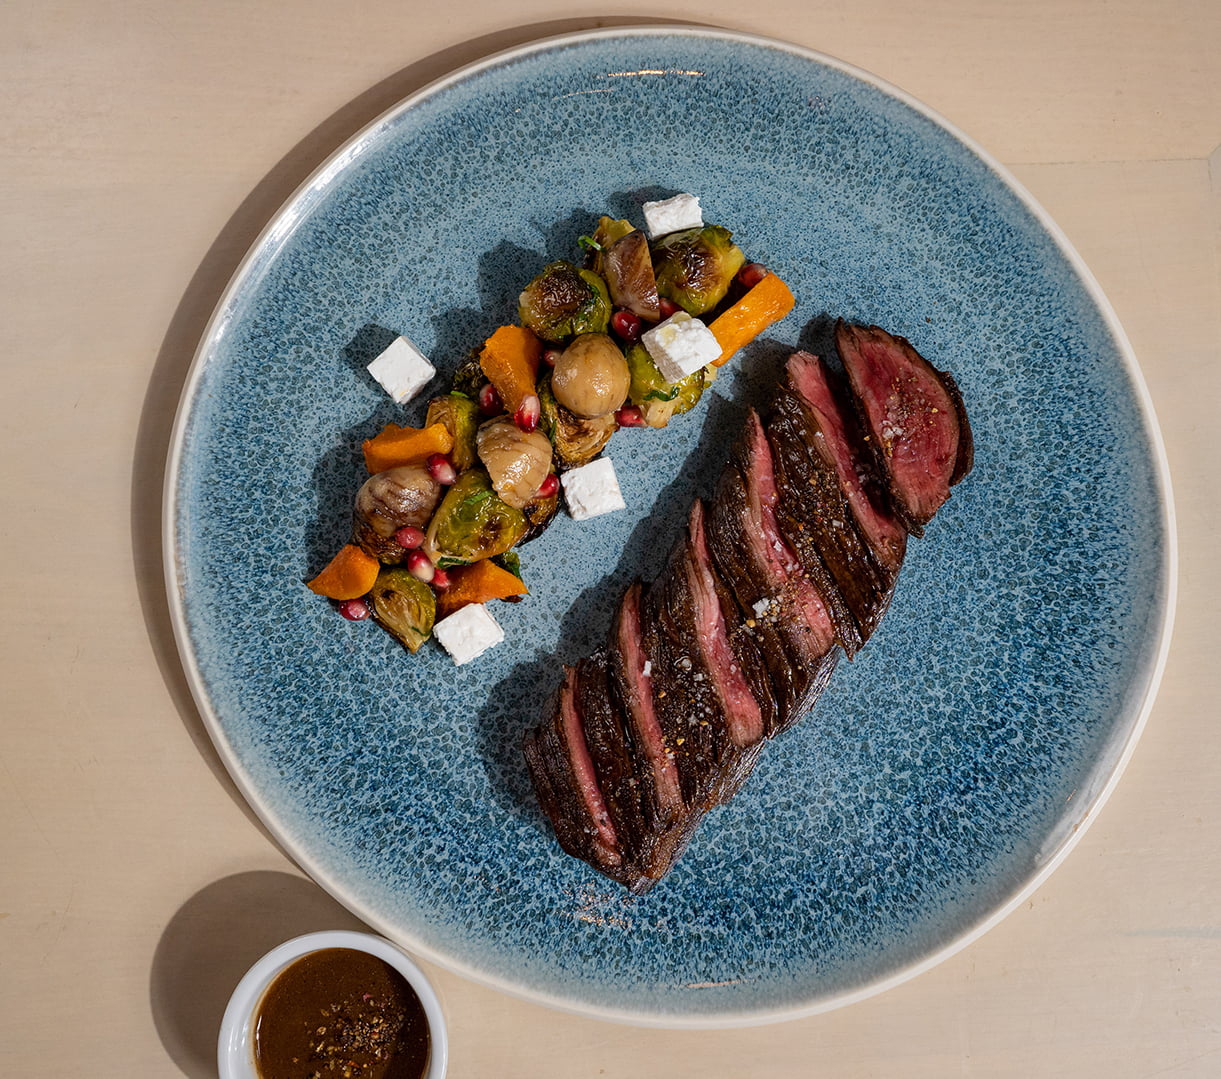 FIG & OLIVE - Grass-Fed Hanger Steak Roasted Brussels Sprouts & Squash, Confit Chestnuts, Feta Cheese, Pomegranate, Candied Bacon, ‘Sauce au Poivre’